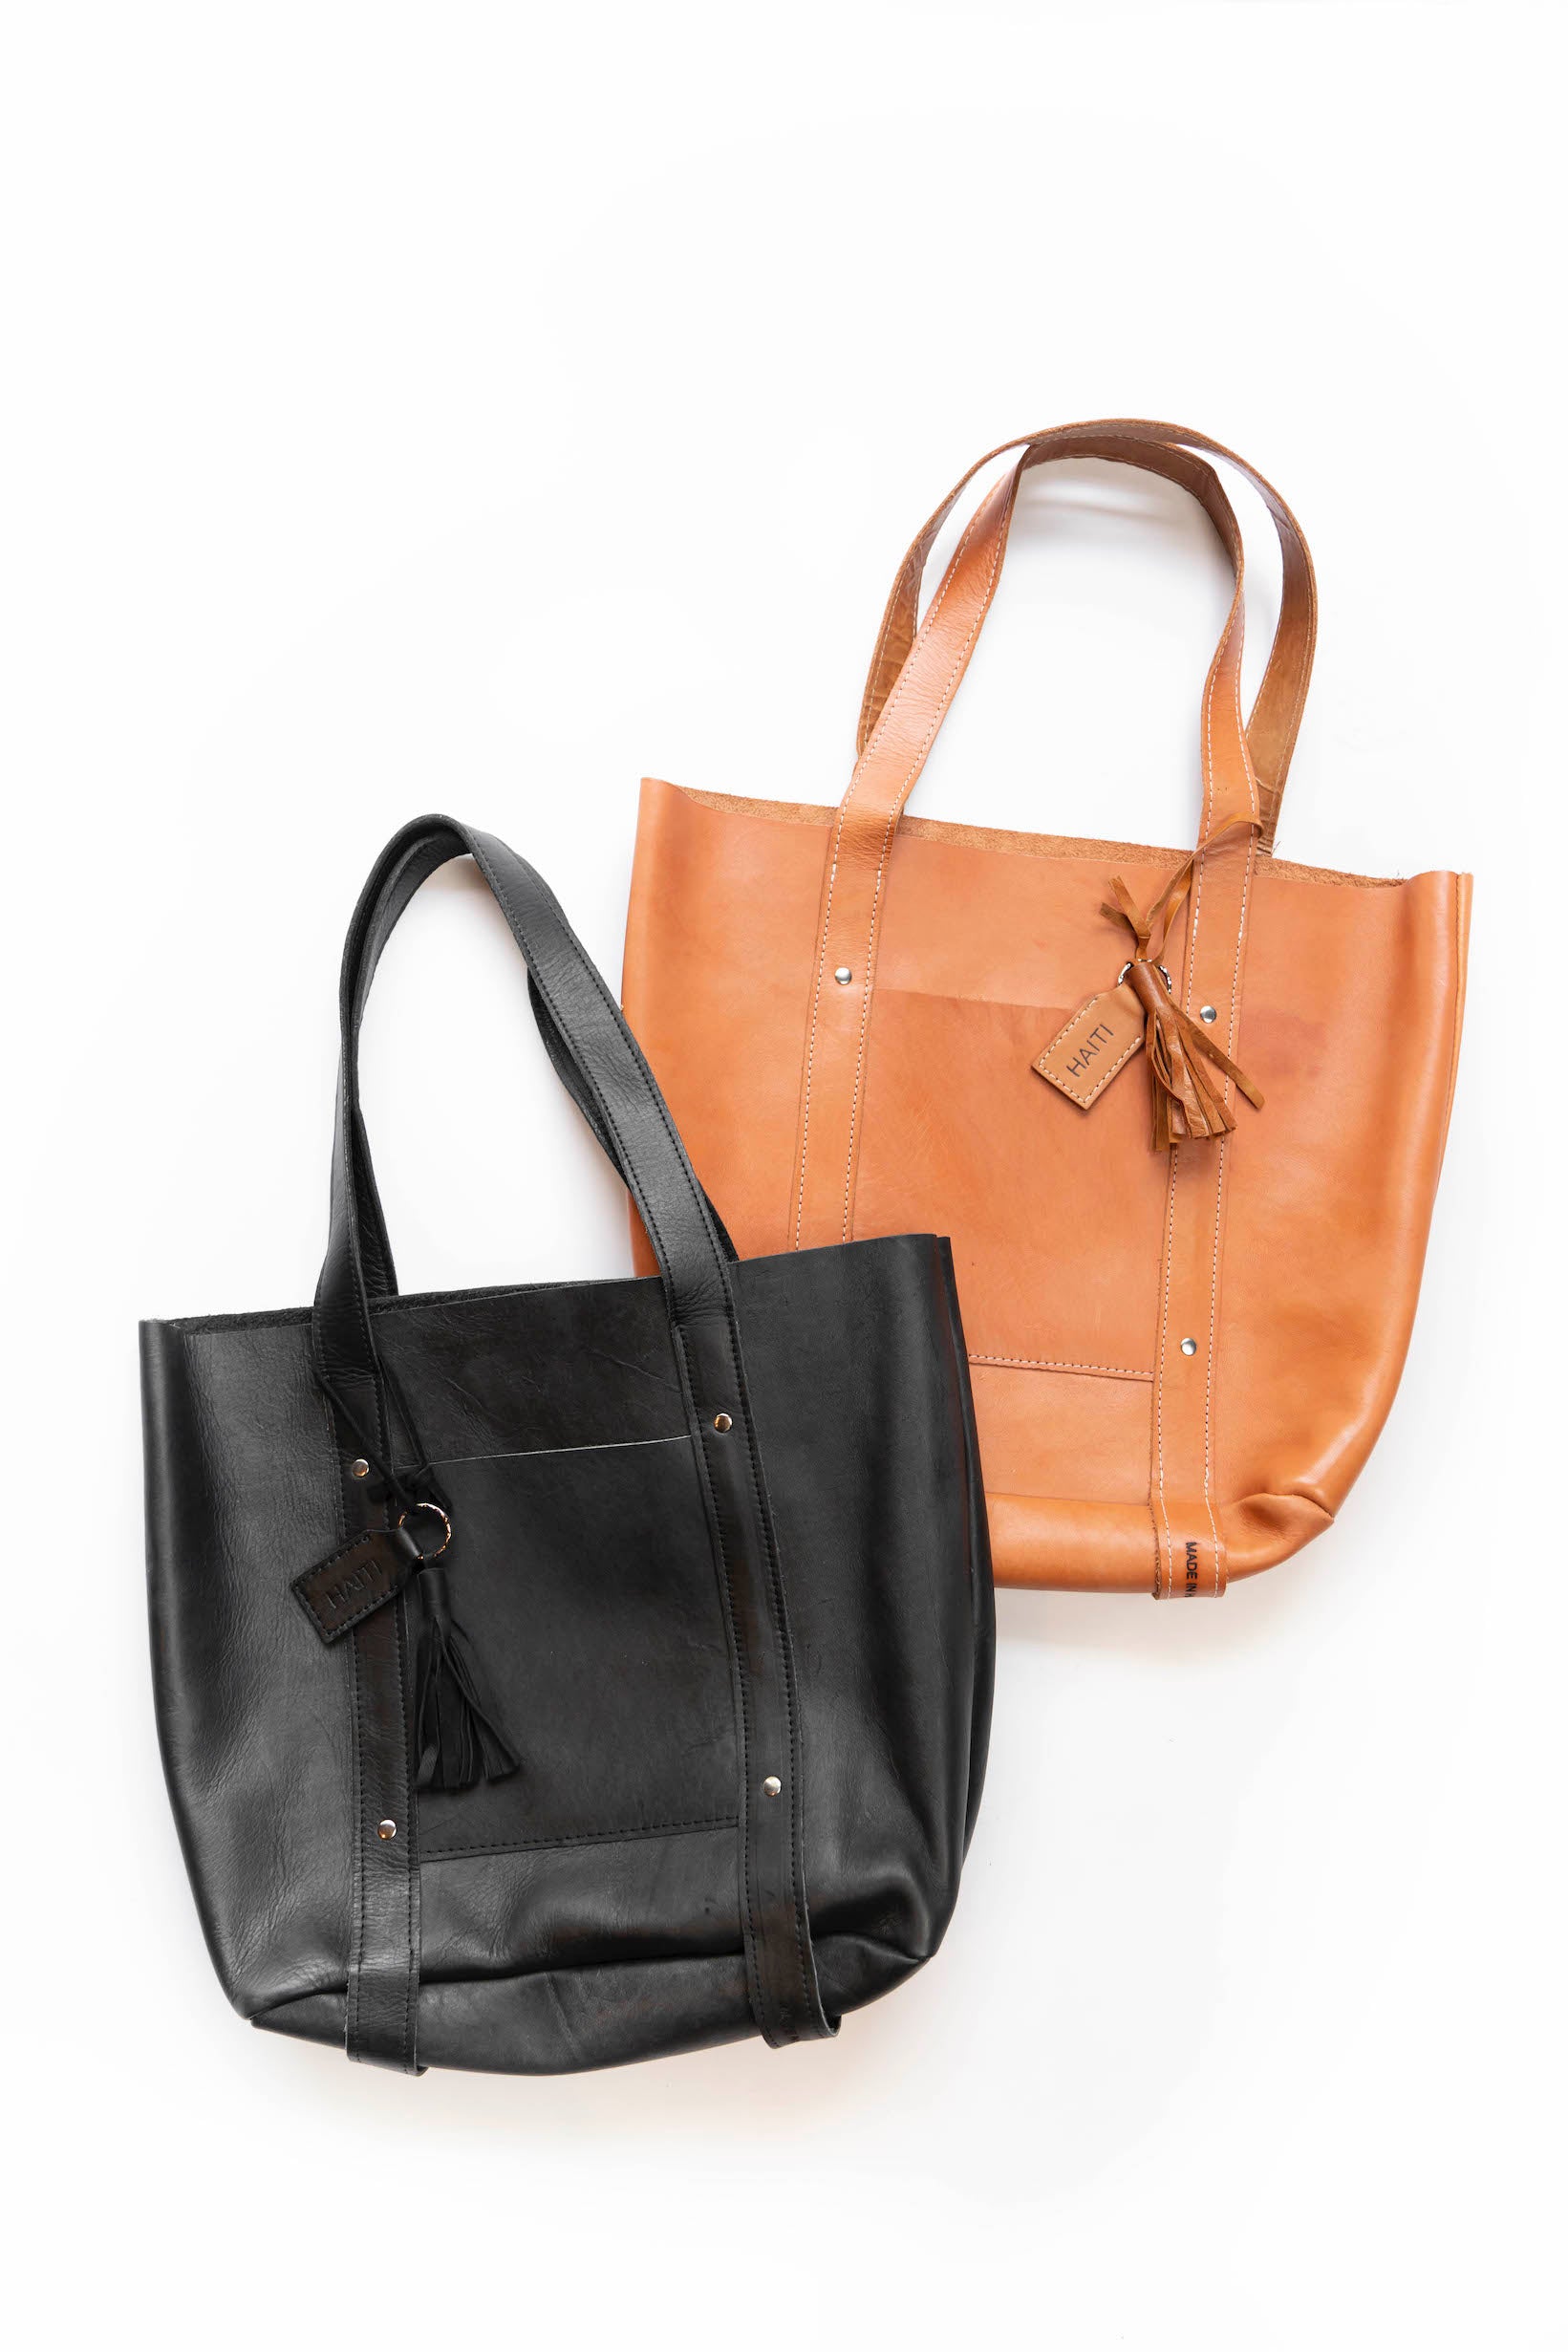 Large Tan Leather Tote